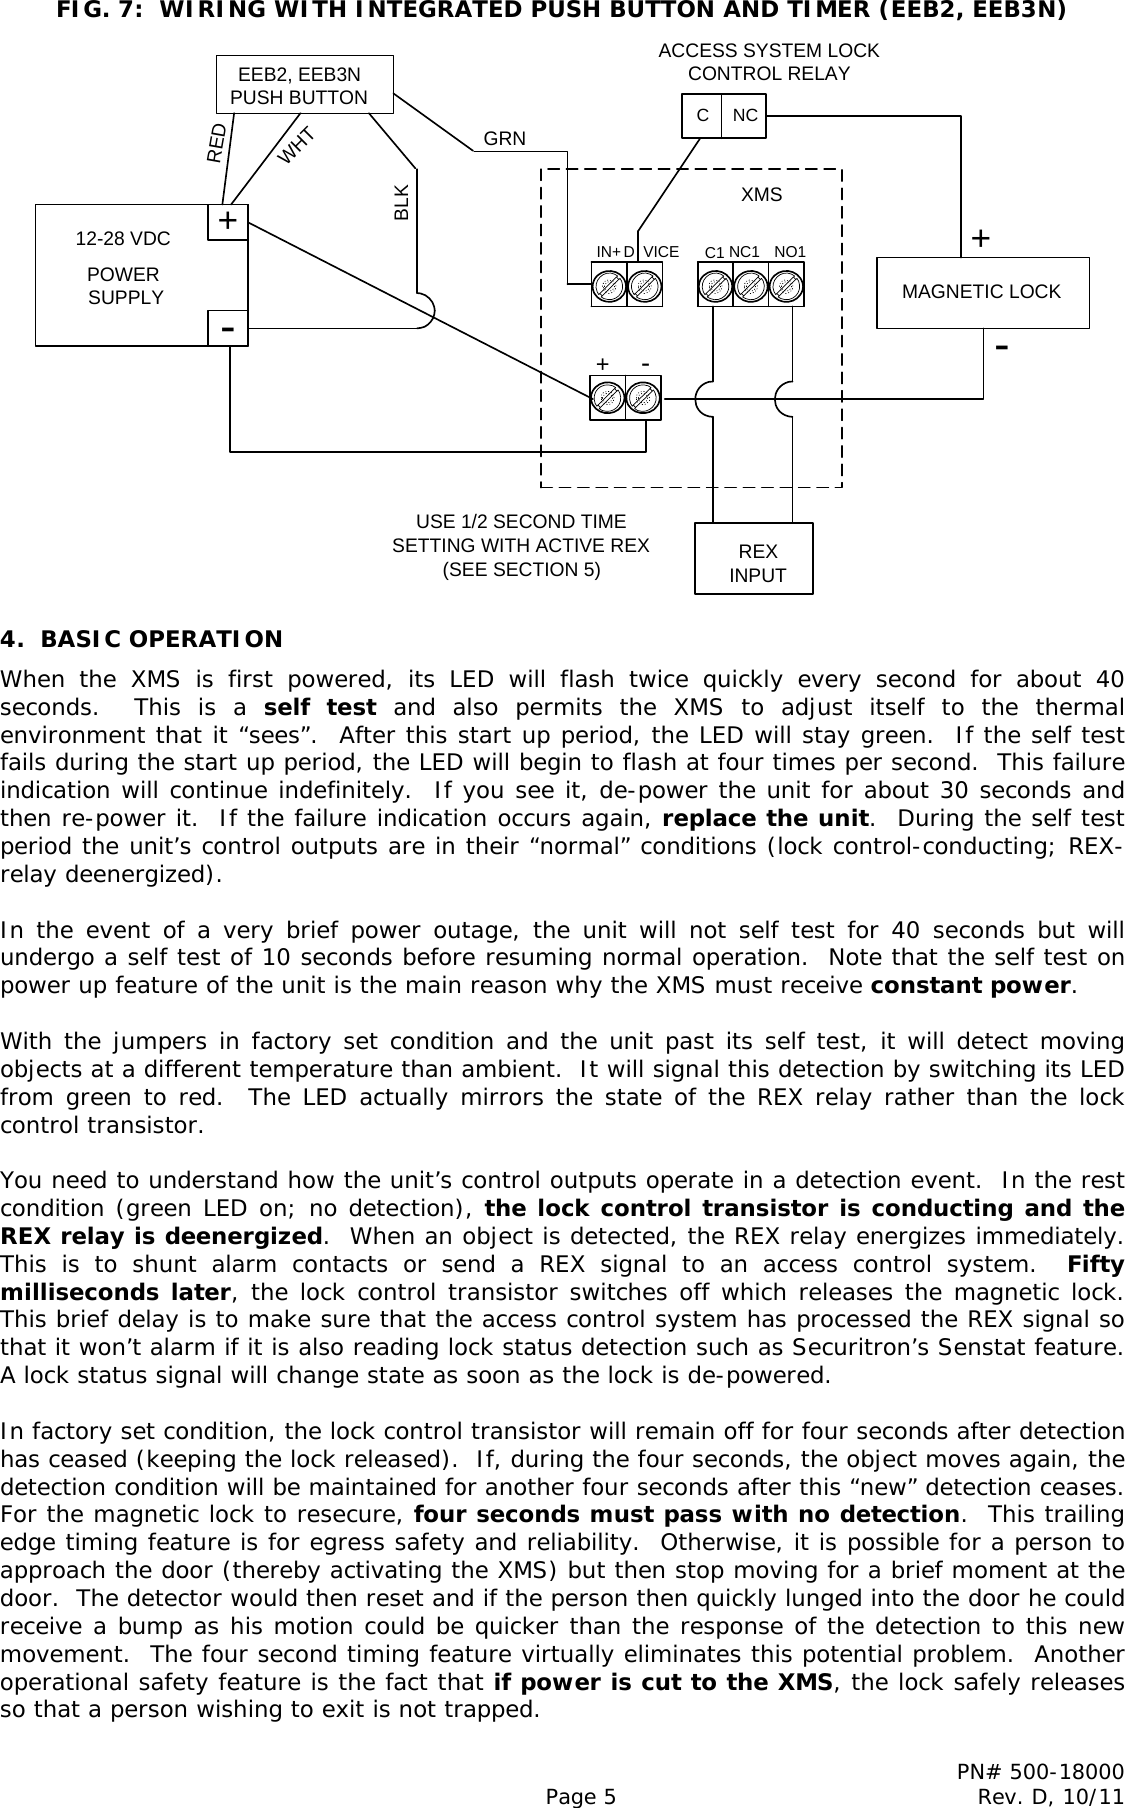 Page 5 of 8 - Securitron - XMS 500-18000_D Installation And Operating Instructions IO 500-18000 20D